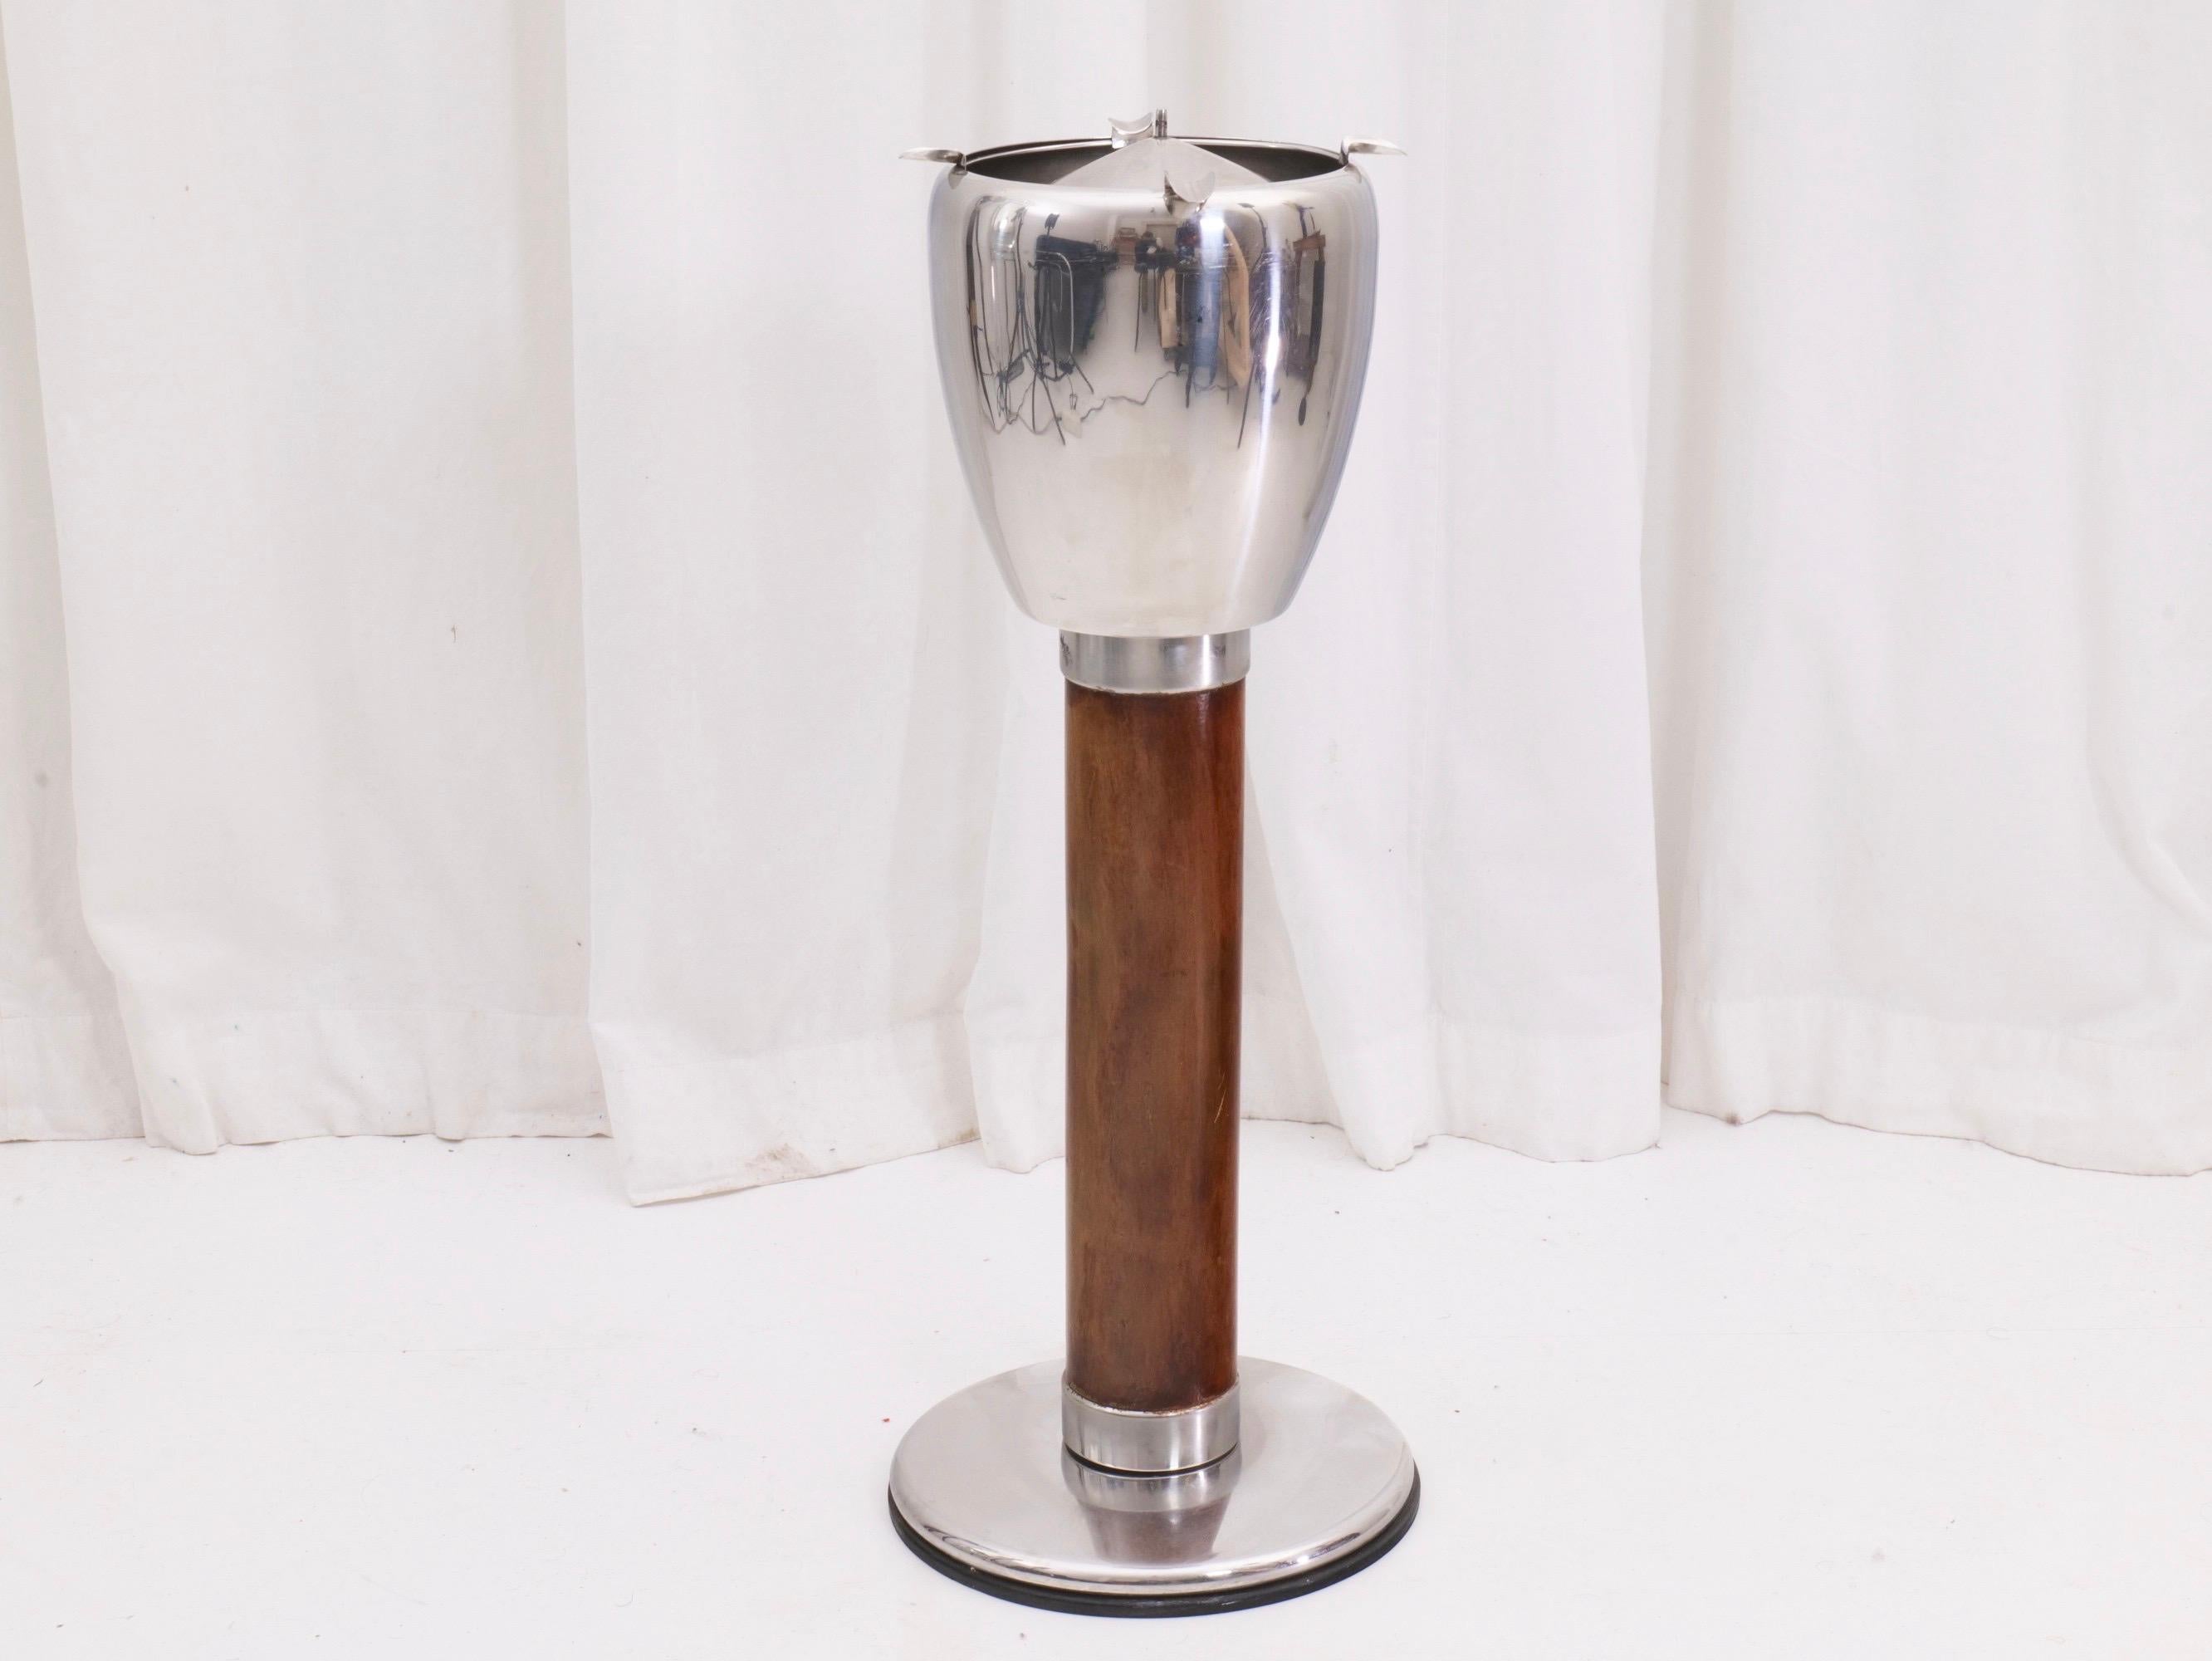 Original 1930s Art Deco tuxedo Stand from France. Made of chrome plated stainless steel and shellac polished walnut wood.
This classy ashtray were used in posh hotels, restaurants and nightclubs of the glorious 30s.
Great original condition with